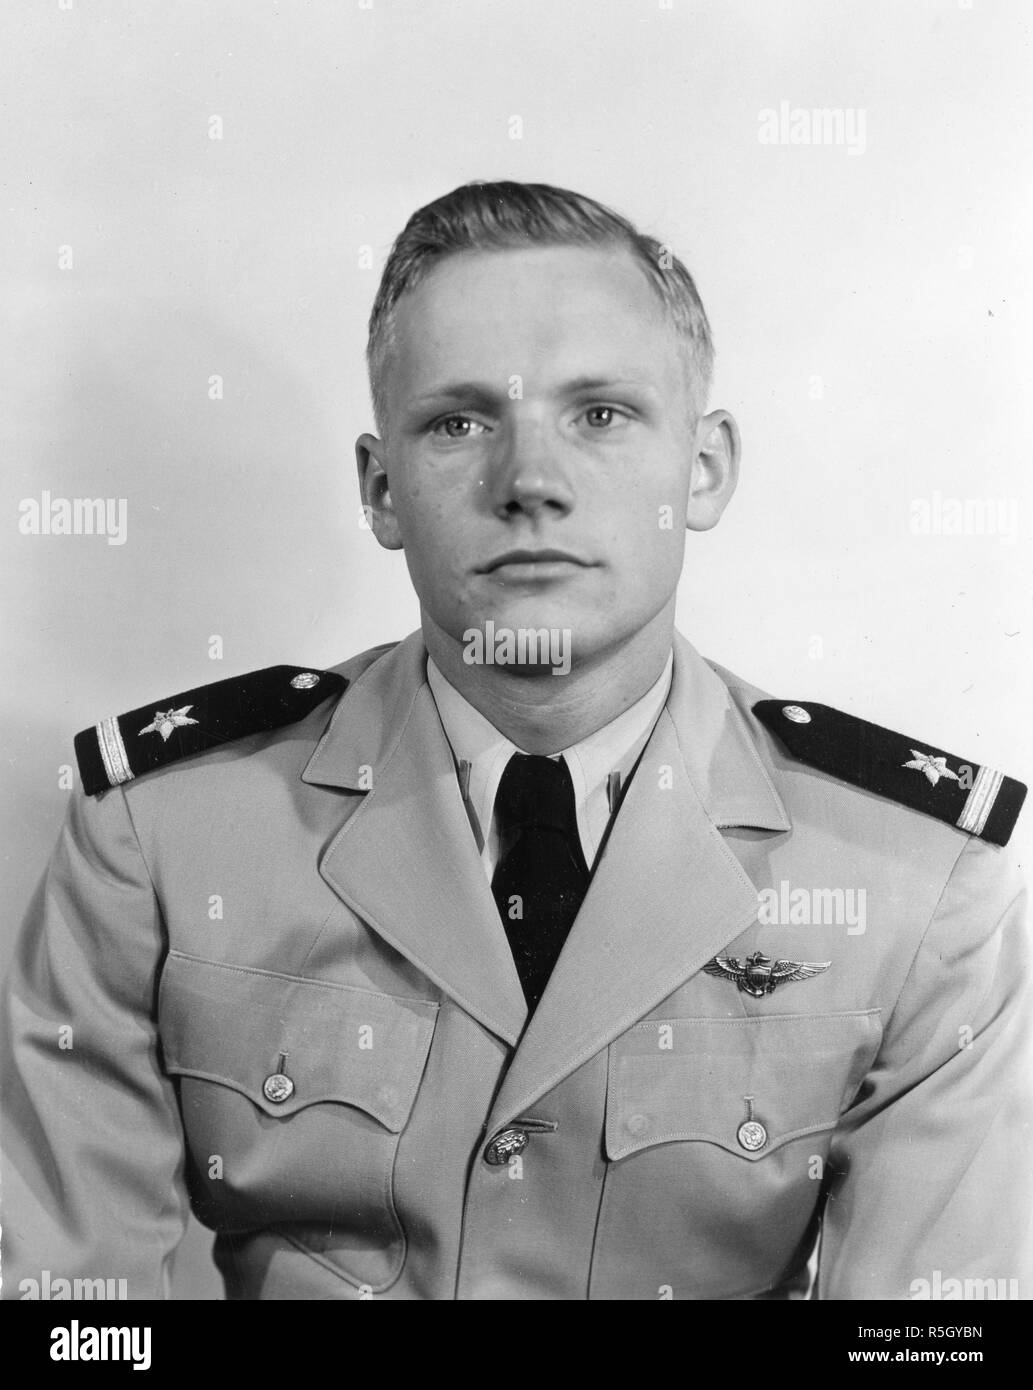 Official Navy photograph of Ensign Neil A. Armstrong, future NASA astronaut and first man to set foot on the moon during the Apollo 11 mission, during his Navy service during the Korean War, May 23, 1952. Stock Photo